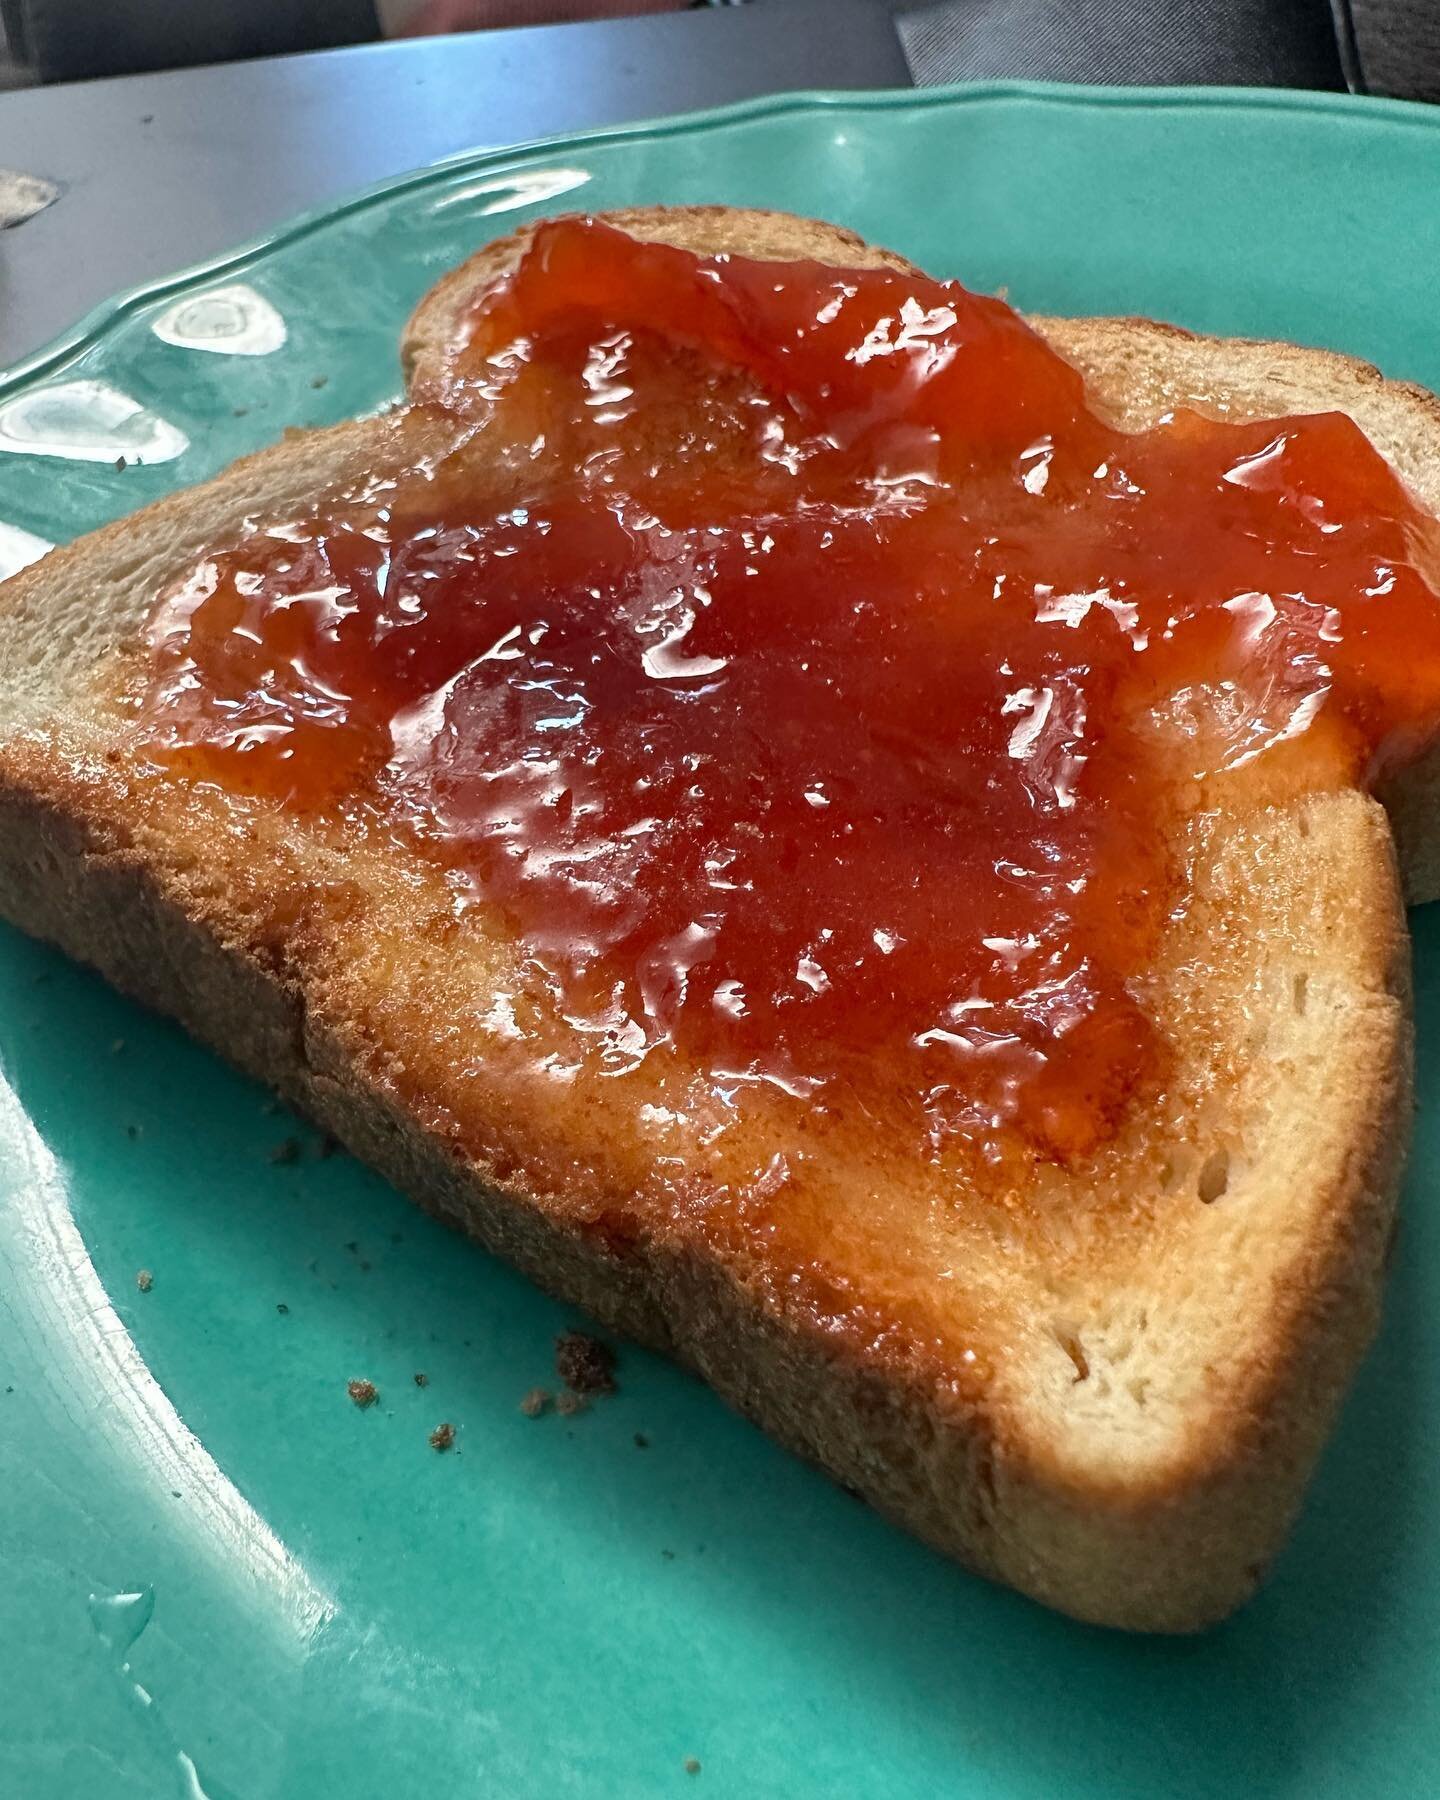 &ldquo;Maura, I&rsquo;m eating all this jelly. Tell your mom it&rsquo;s the best nectarine jelly I&rsquo;ve ever had, and I&rsquo;m a jelly connoisseur🔥🥰🔥🥰 I need a cocktail 🌳 #homemadewithlove #canningandpreserving #recipeneededasap